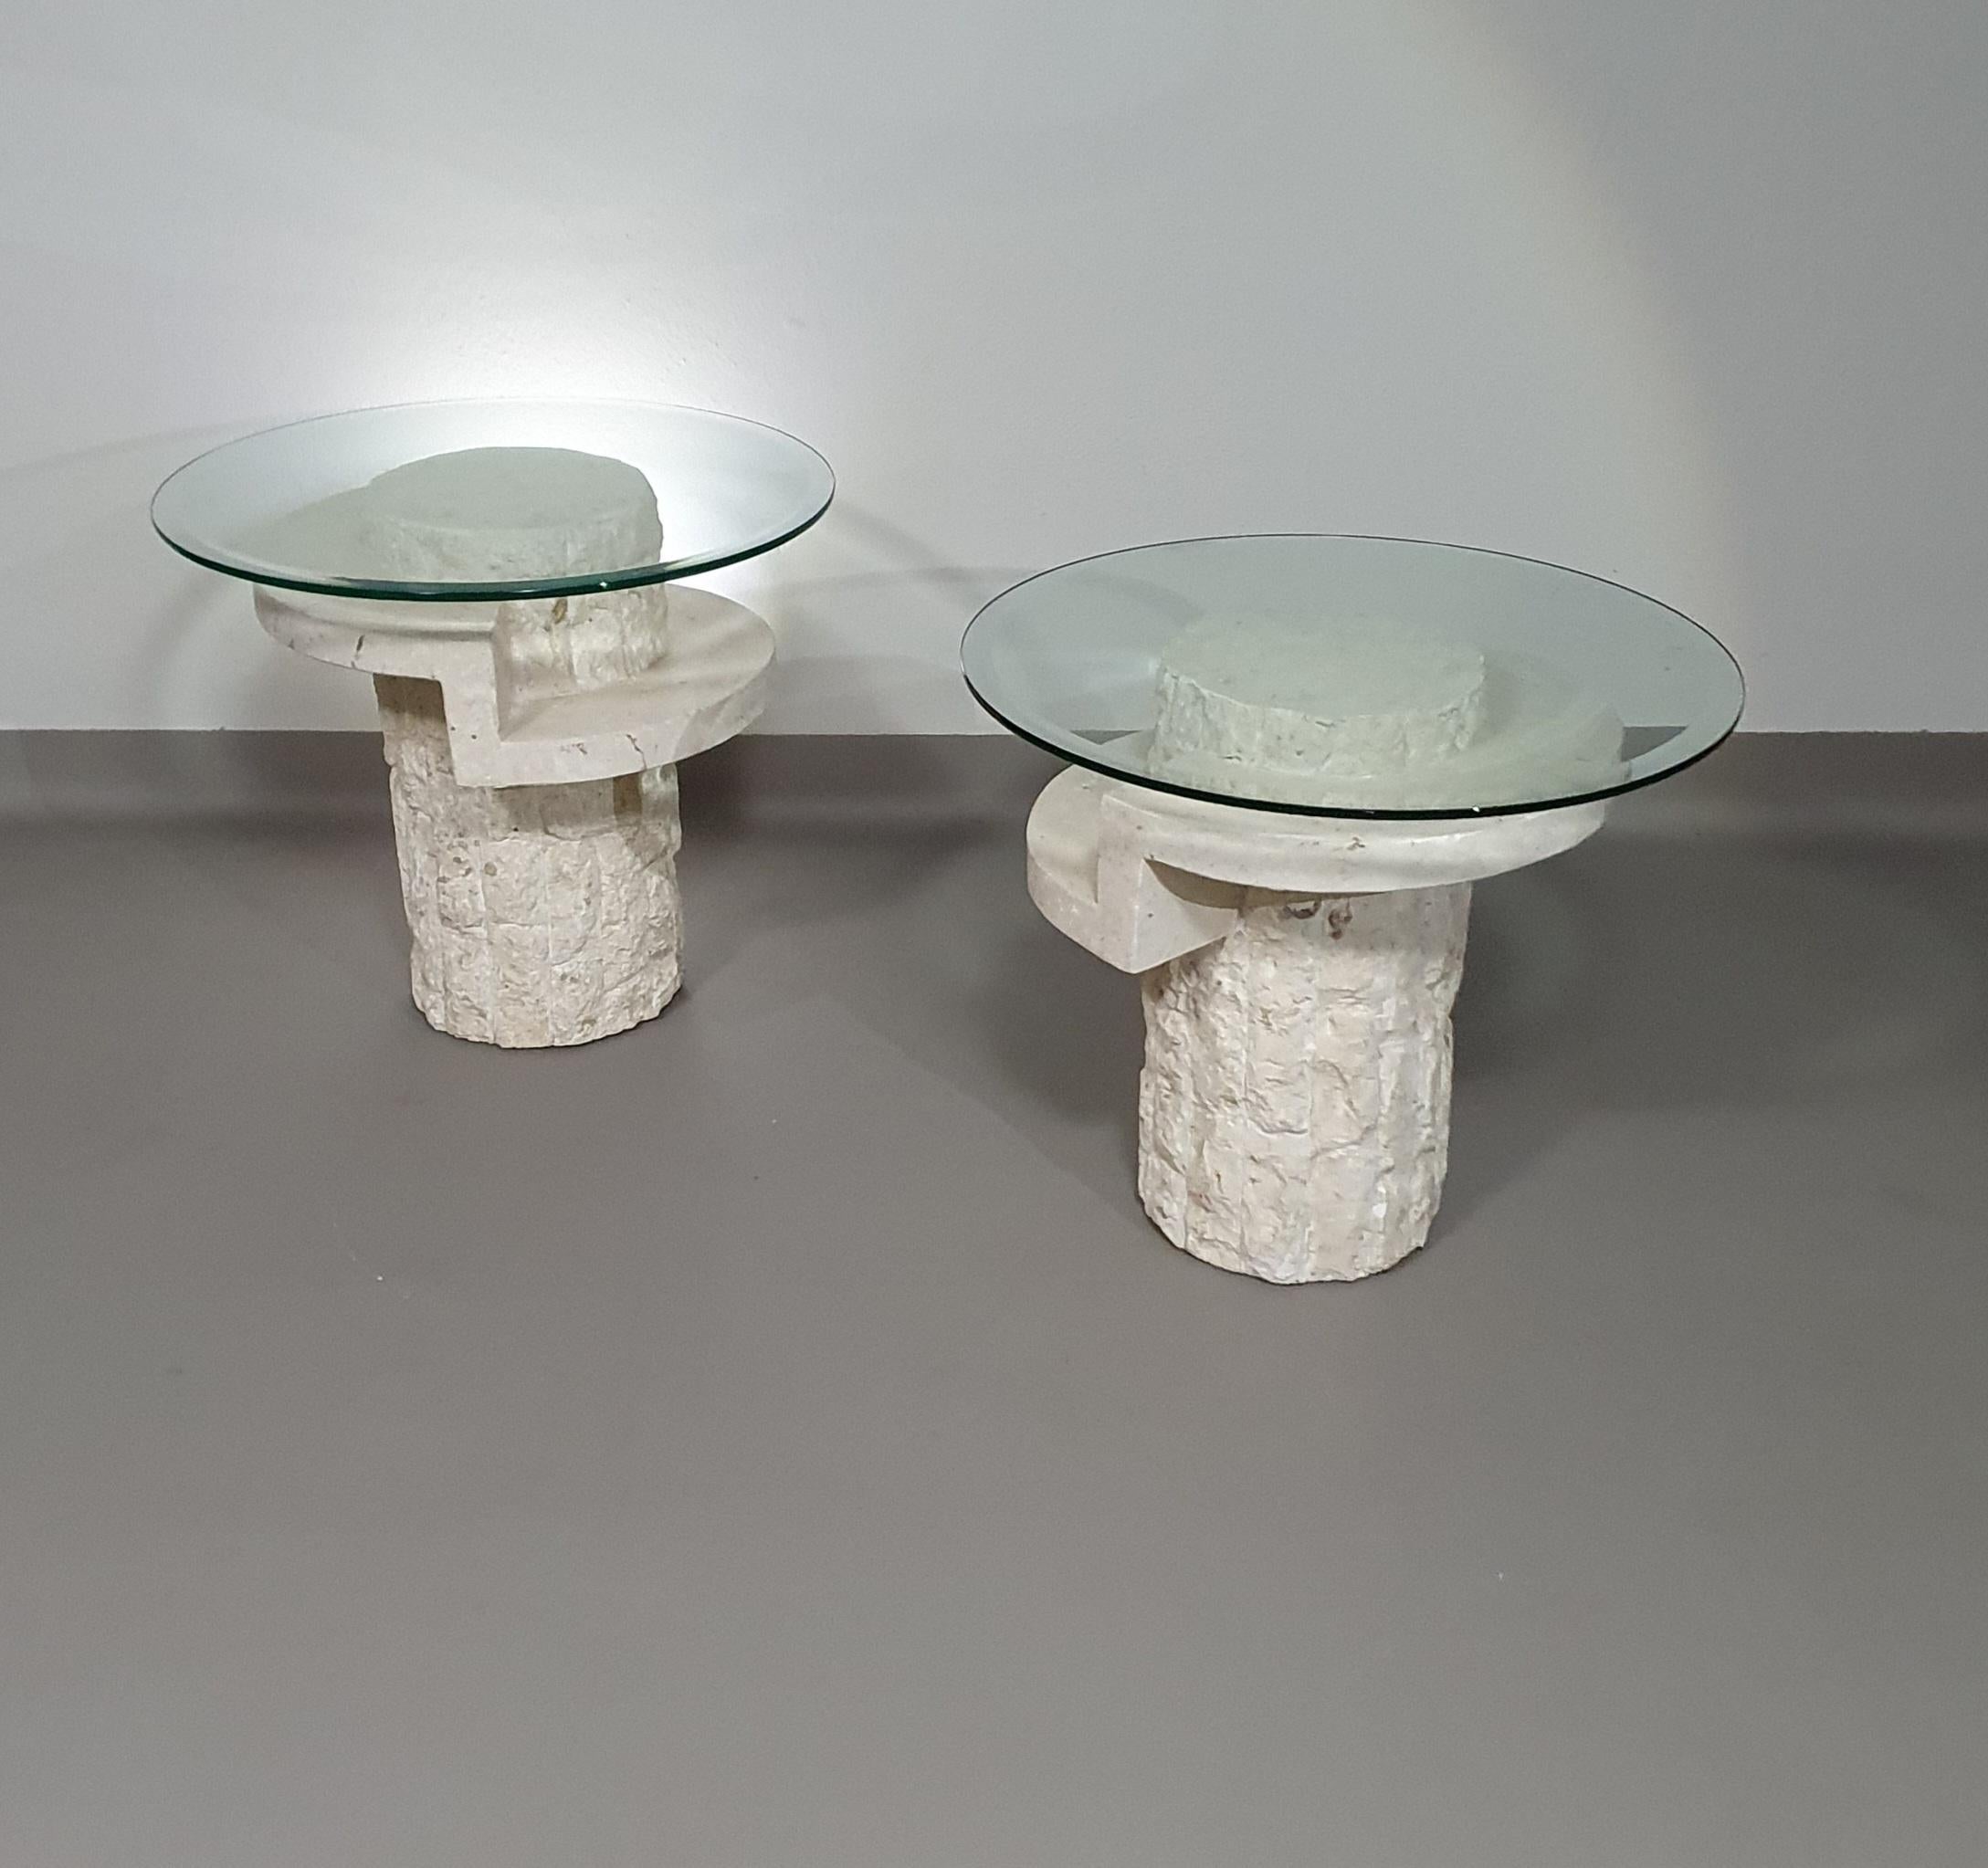 Vintage Mactan stone side tables with the original, faceted glass tops by Magnussen Ponte, 1980
Mactan or Fossil Stone fosil stone side / coffee  tables by Magnussen Ponte, 1980s

Height 52 cm

Depth glass top 60 cm